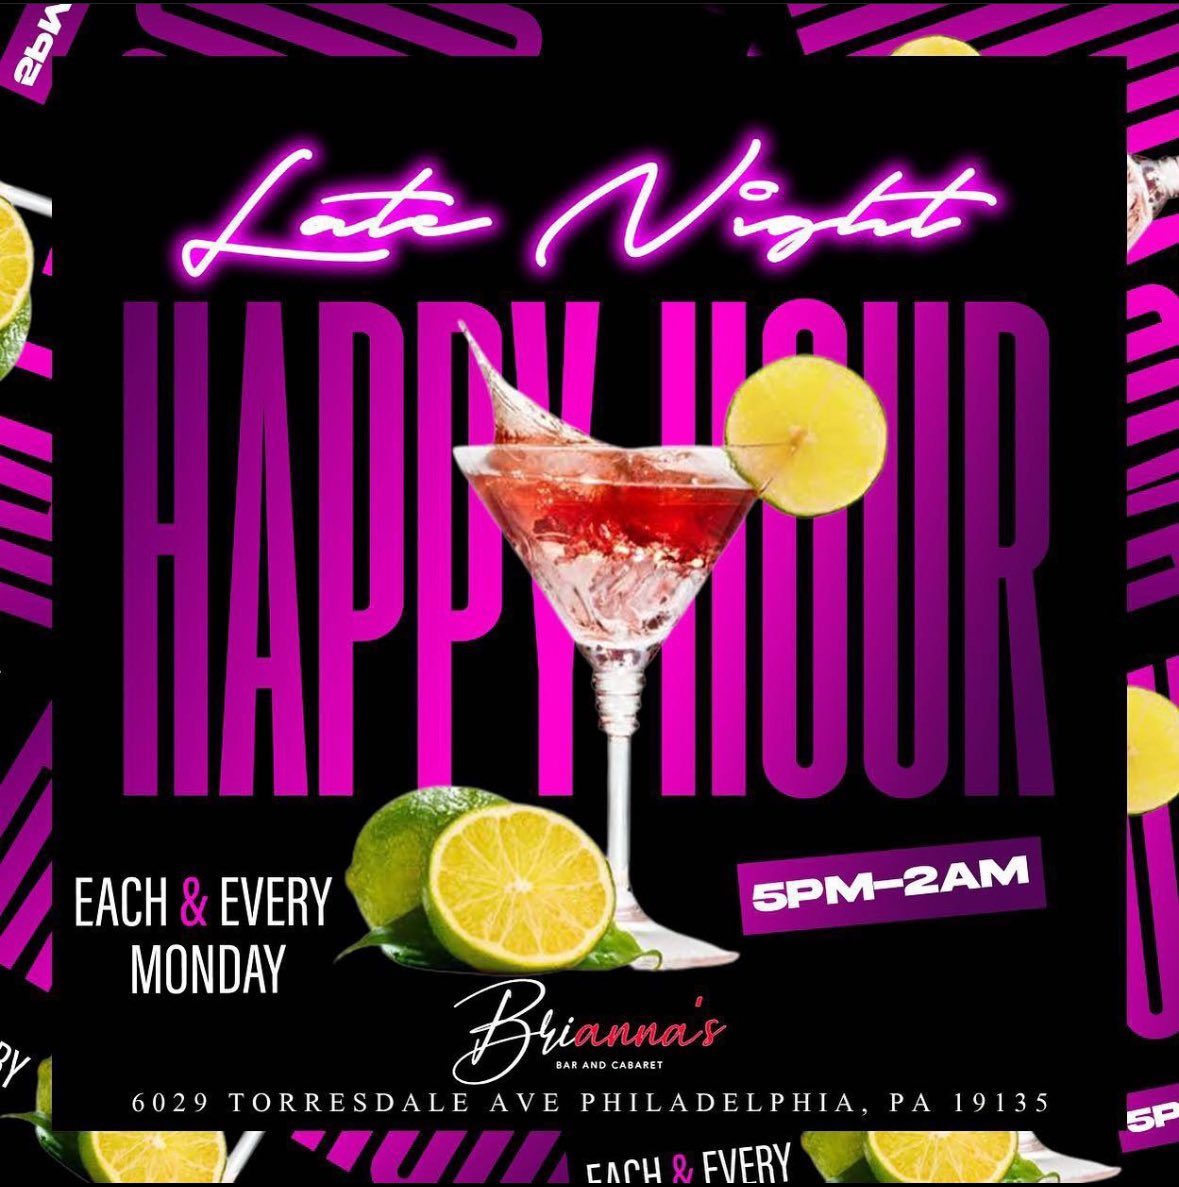 LATE NIGHT HAPPY HOUR 🍻 
Each & Every Monday 
FREE ENTRY ALL DAY LONG ‼️‼️‼️
— Drink Specials Until 12AM —
@briannascabaret 5PM-2AM
6029 Torresdale Ave Philadelphia, Pa 19135
#HAPPYHOURALLDAY #GOODFOODS #GOODVIBEZ #GOODDRINKS #DANCERS #BADDIES #NORTHEAST